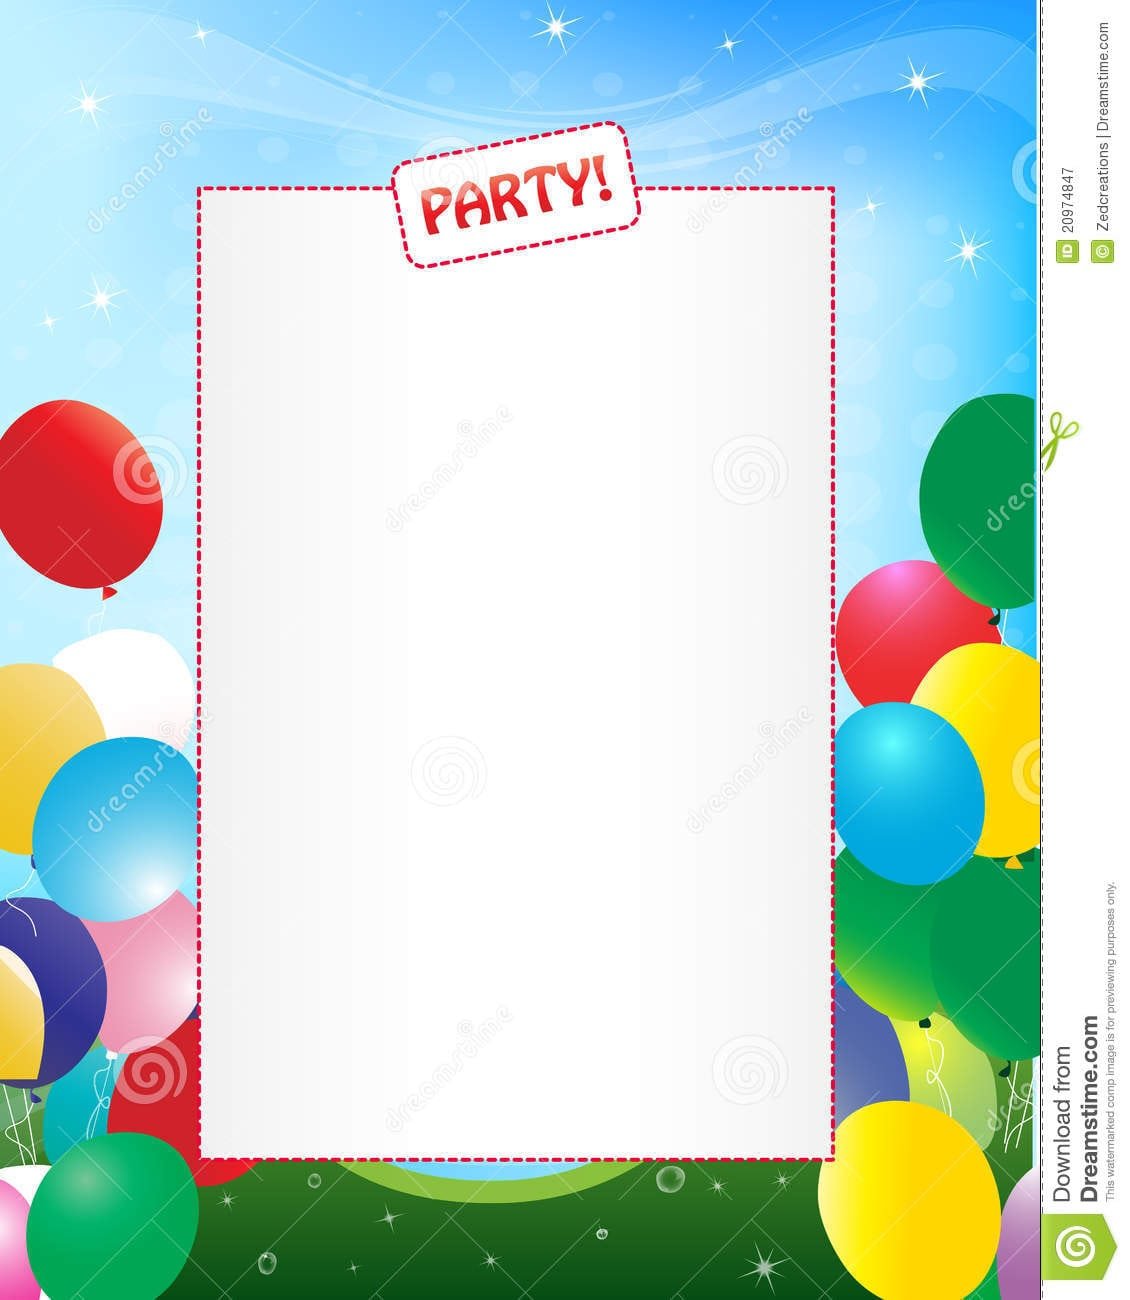 Party Invitation Background Royalty Free Stock Photography